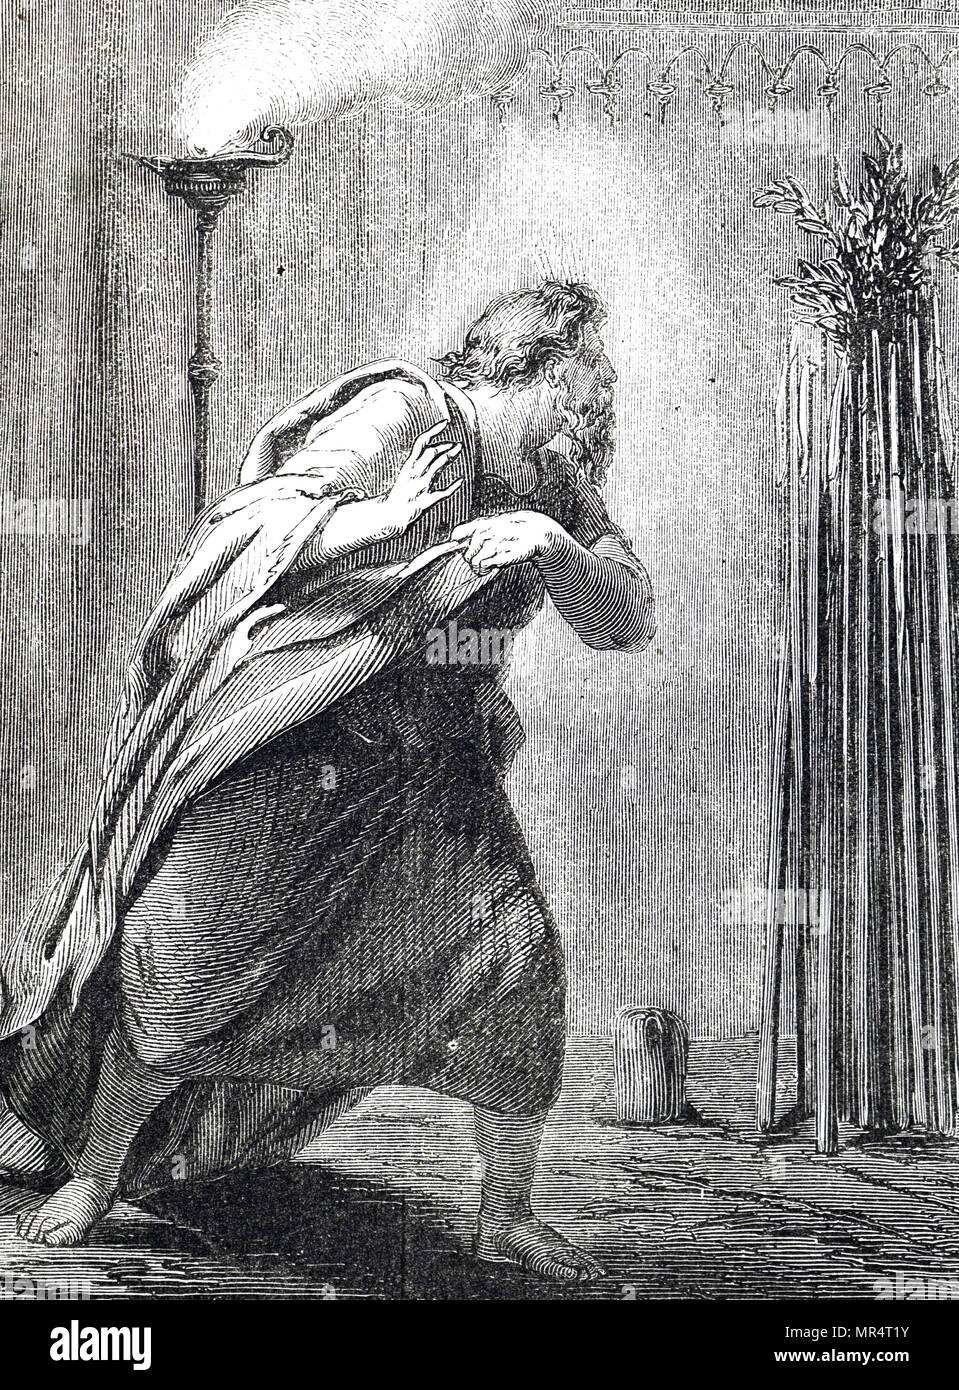 Engraving depicting Aaron's Rod being placed with the others of the twelve tribes, sends forth leaves showing that he was chosen by the Lord. Aaron's rod refers to any of the staff carried by Moses's brother, Aaron, in the Torah. The Bible tells how, along with Moses's rod, Aaron's rod was endowed with miraculous power during the Plagues of Egypt that preceded the Exodus. There are two occasions where the Bible tells of the rod's power. Dated 19th century Stock Photo